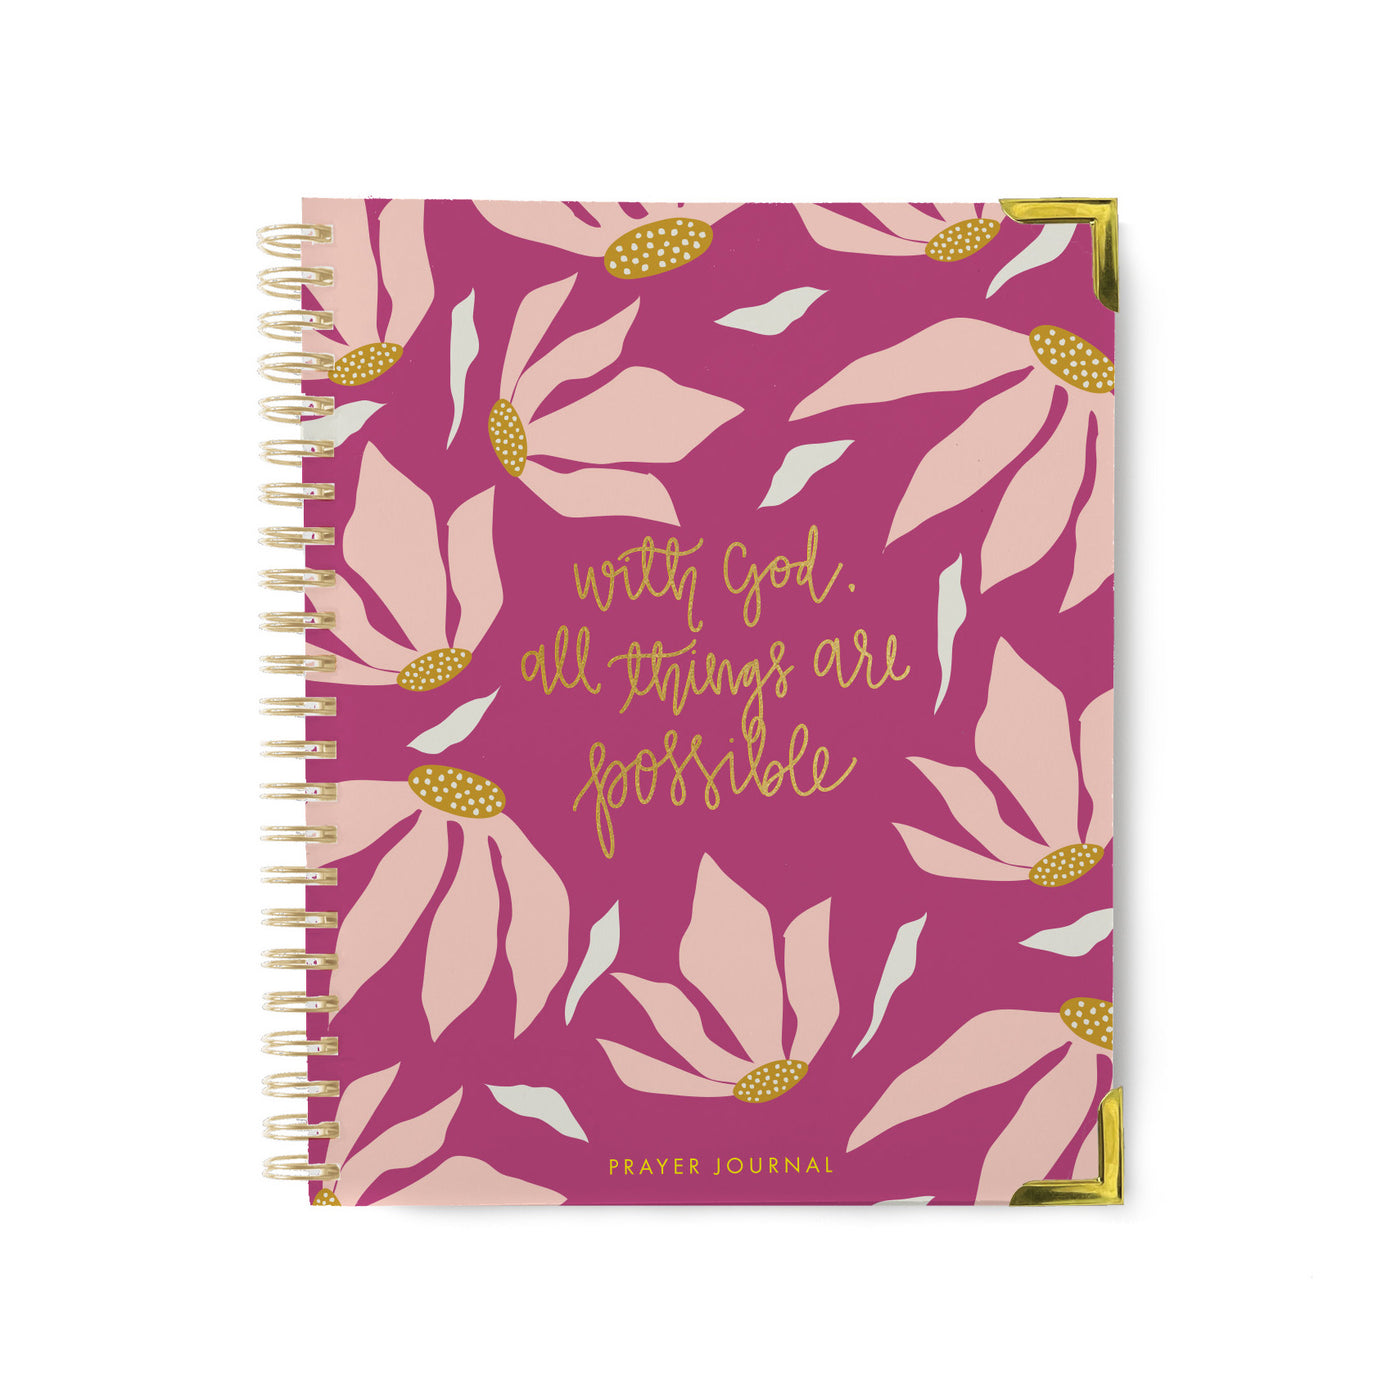 With All Things | Prayer Journal - Mary Square, LLC